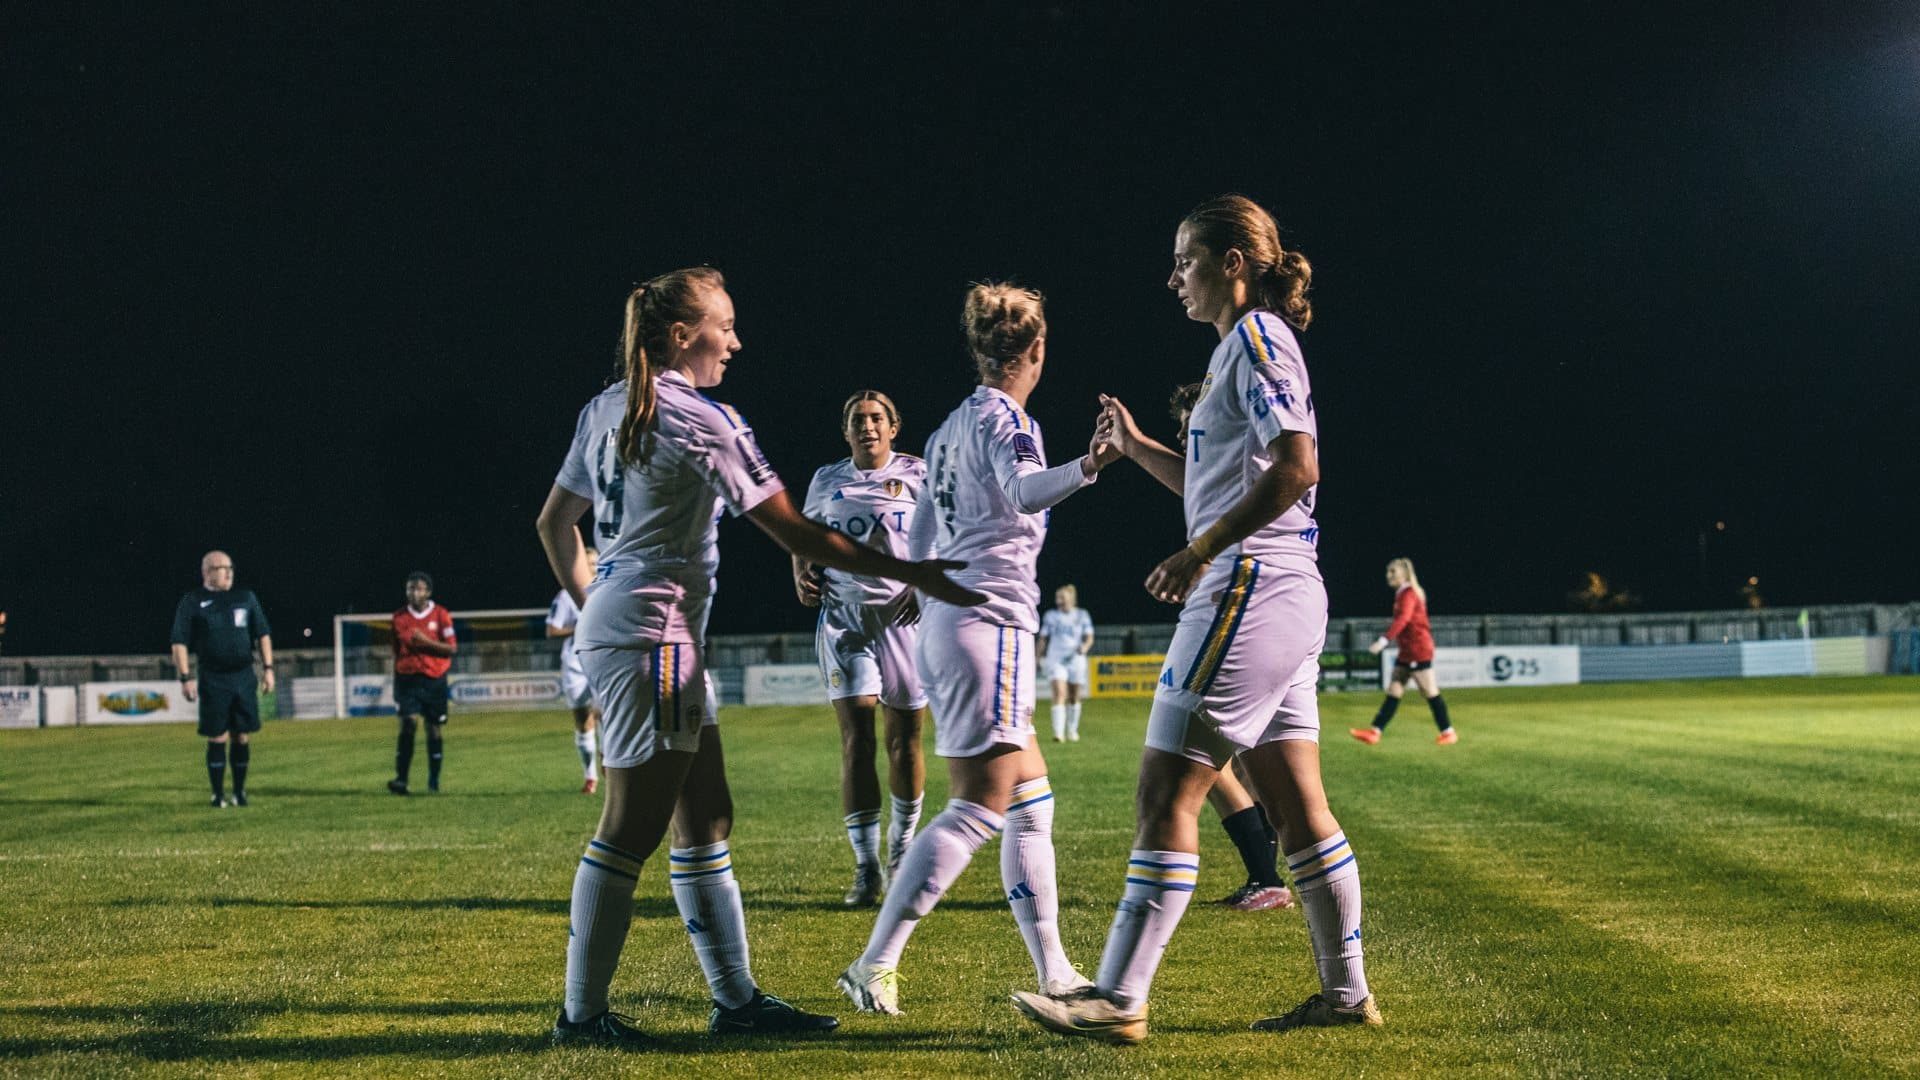 Lots of handshakes among Leeds United Women's players on a floodlit night when they beat FCUM earlier in the season